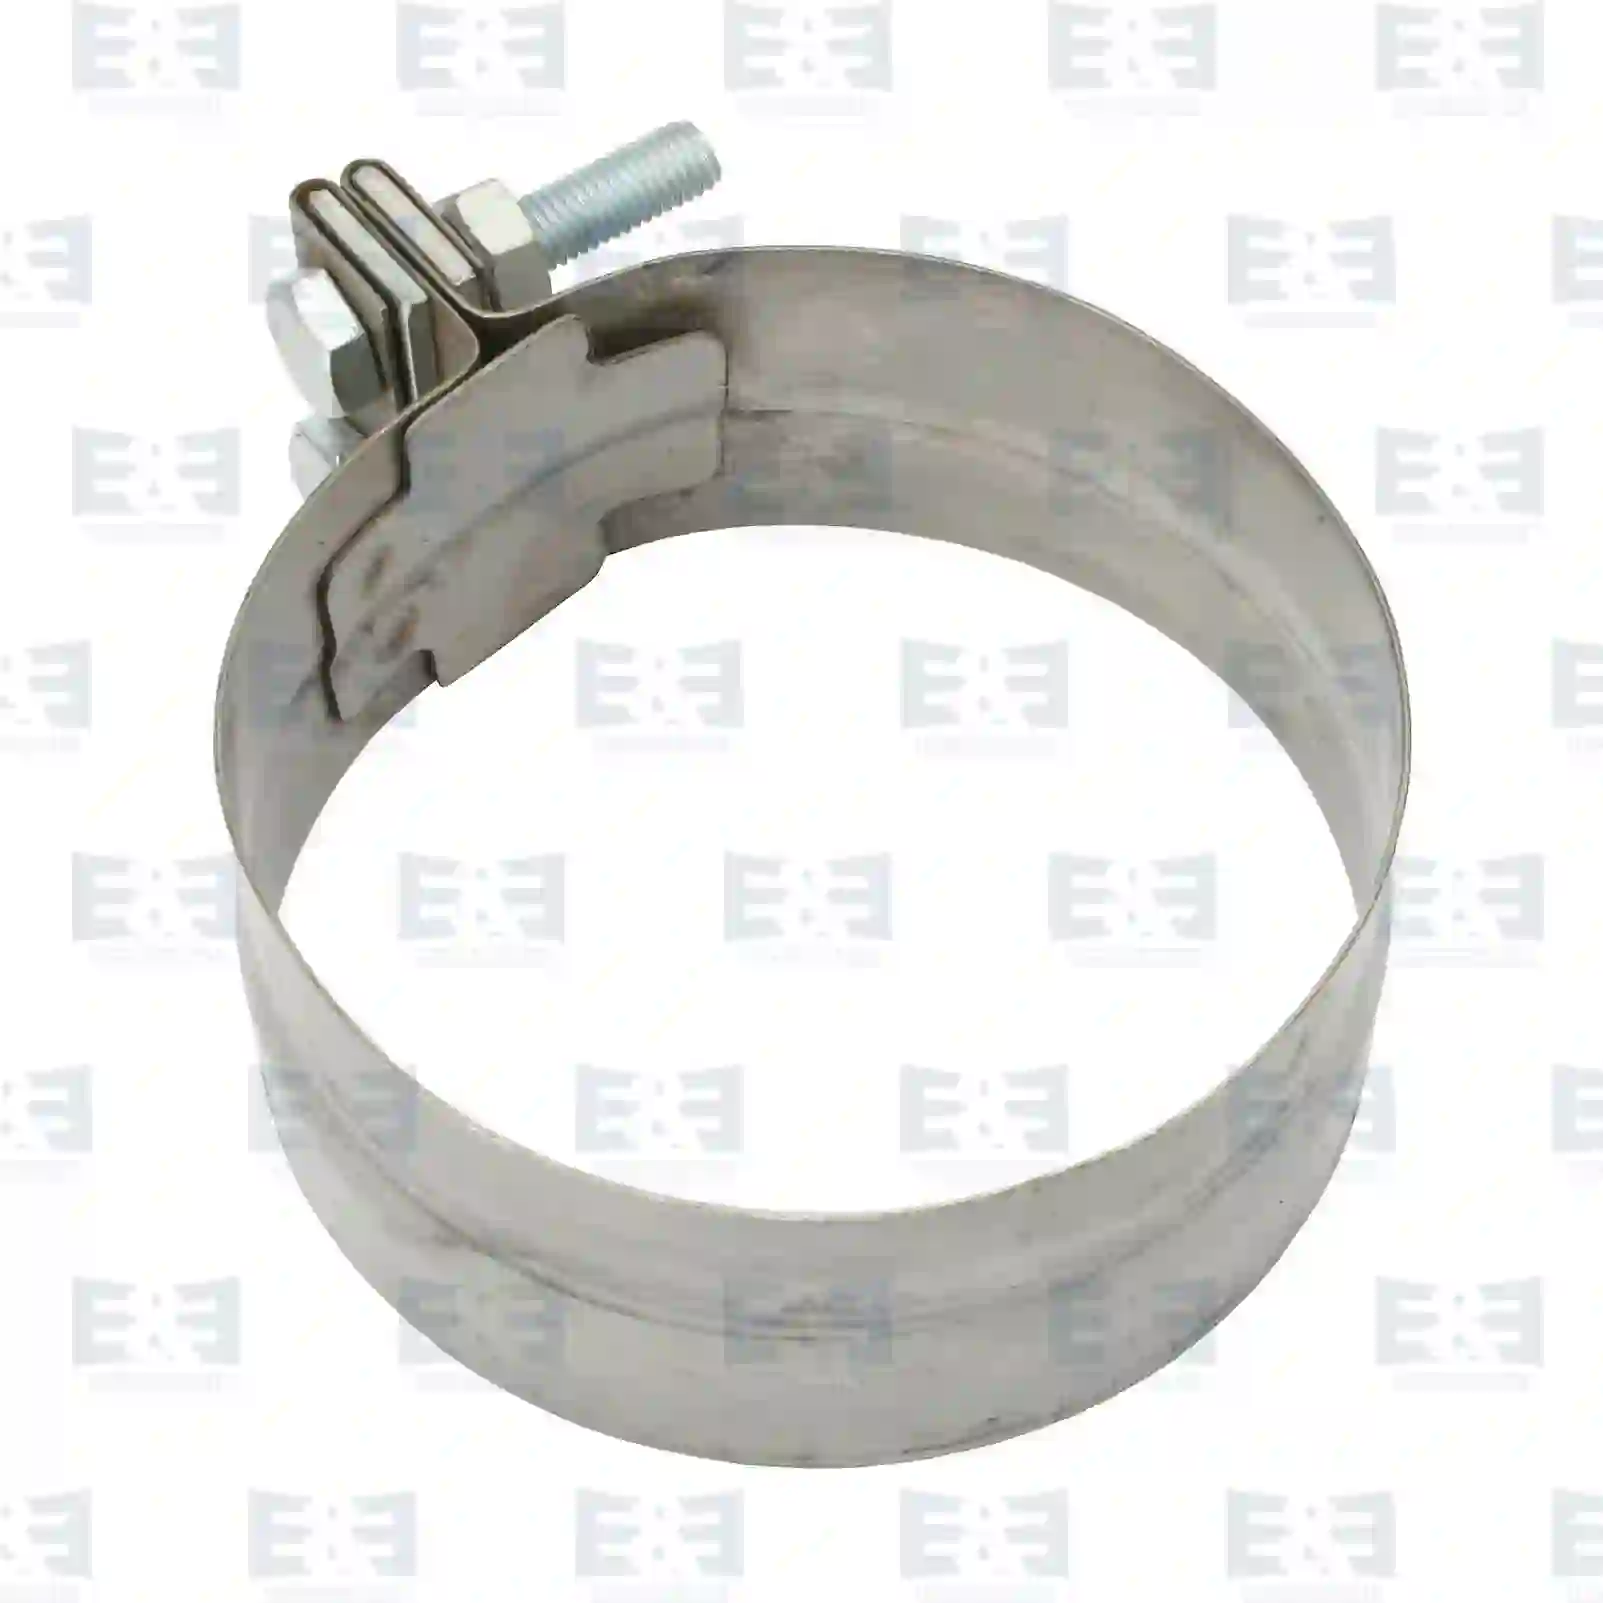 Flexible Pipe Clamp, stainless steel, EE No 2E2204237 ,  oem no:1296068S, 97166049, 7420455908, 20383088S, 20455908, 8156156S, ZG10283-0008 E&E Truck Spare Parts | Truck Spare Parts, Auotomotive Spare Parts